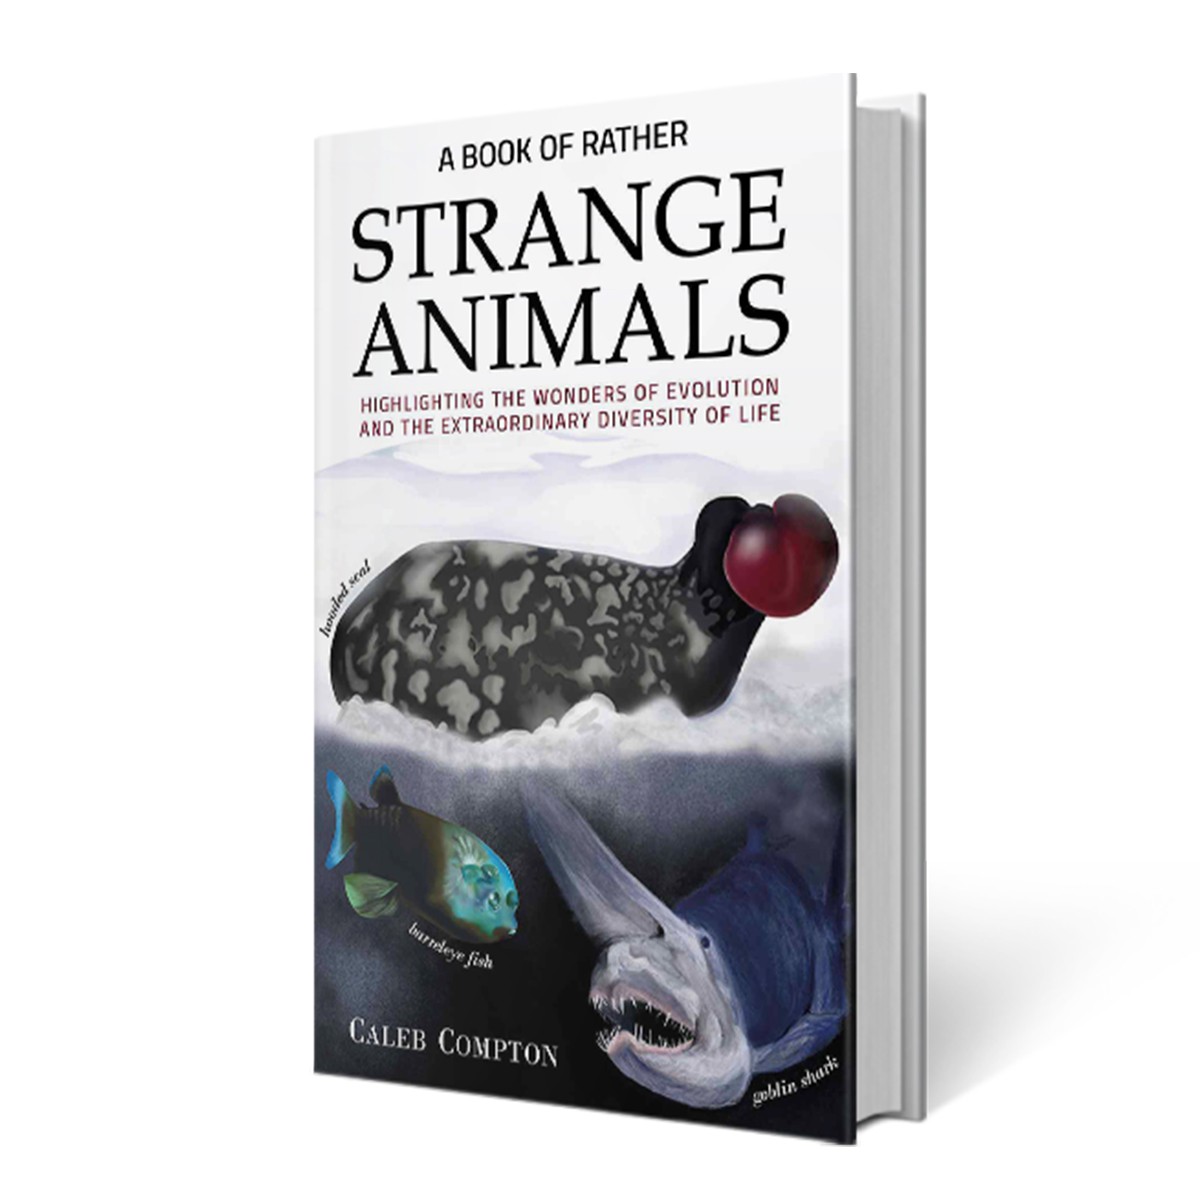 Book Faerie Reviewed A Book of Rather Strange Animals by Caleb Compton on Her Website